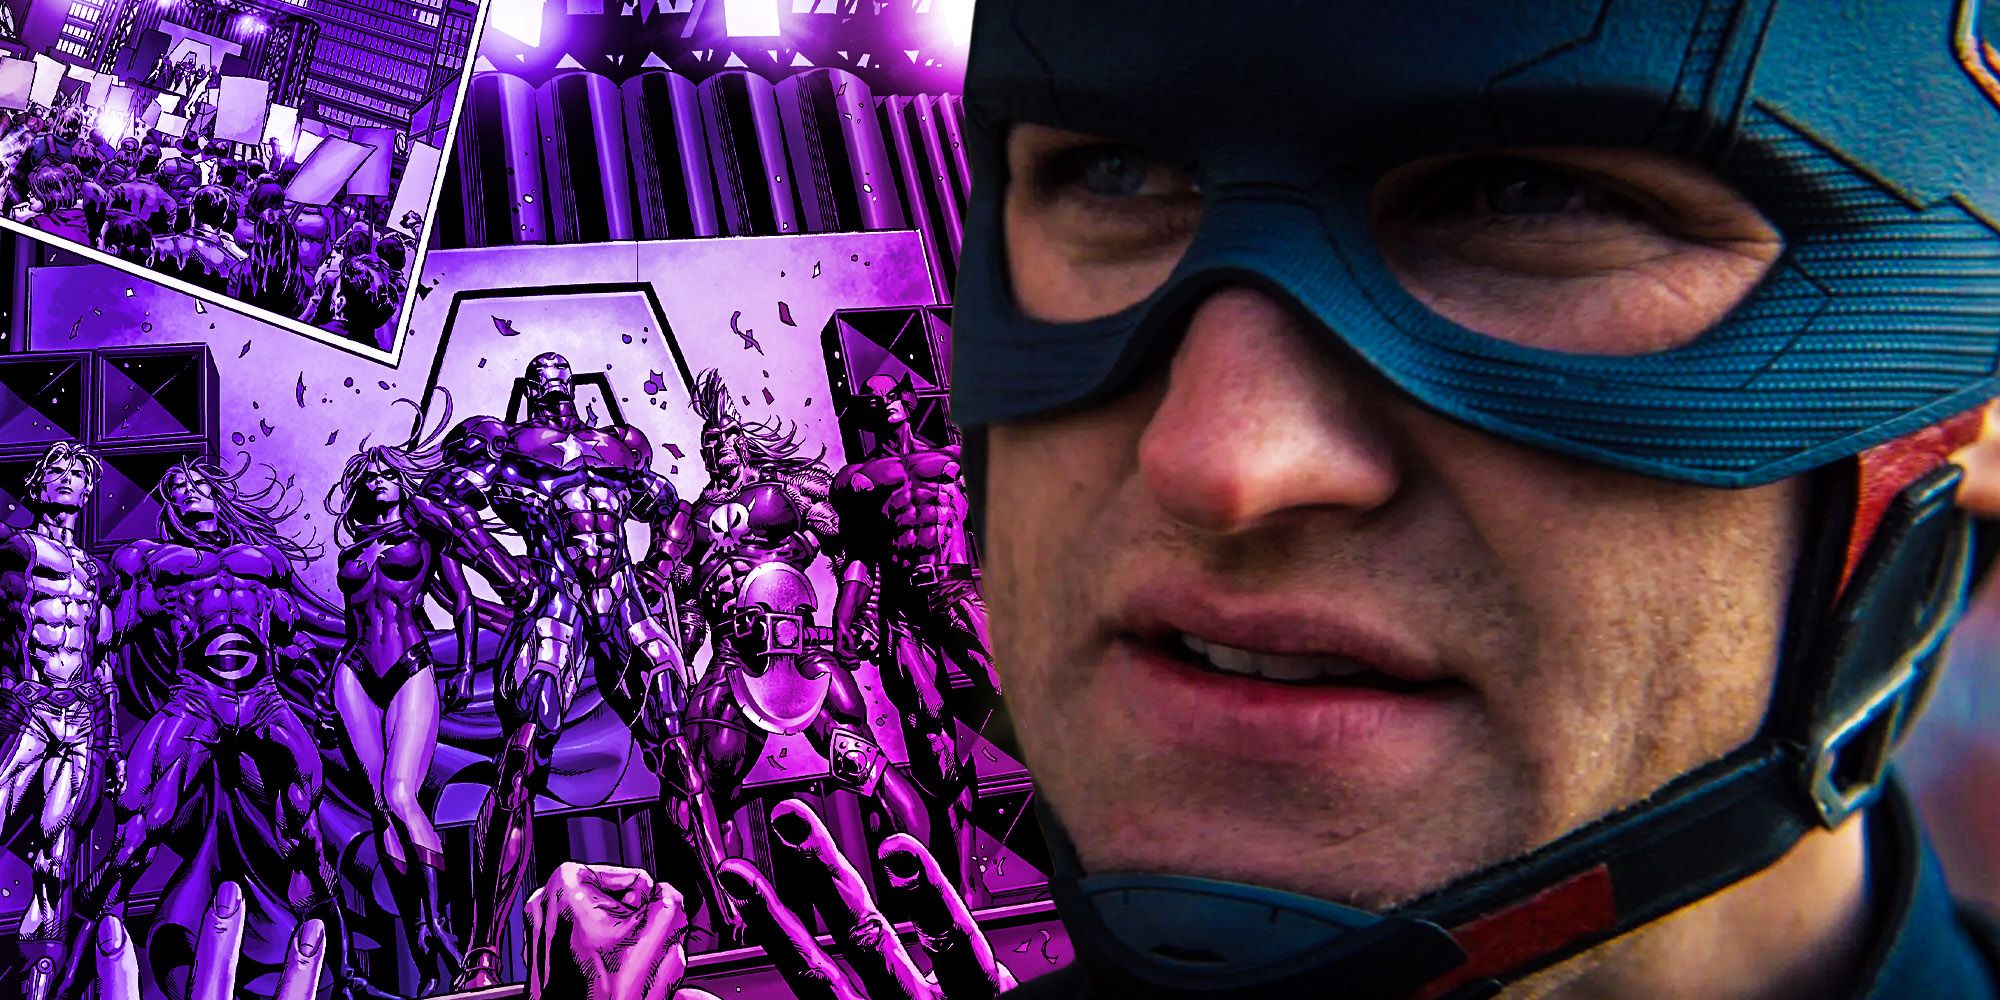 Theory John Walkers Captain America Will Lead To The Dark Avengers